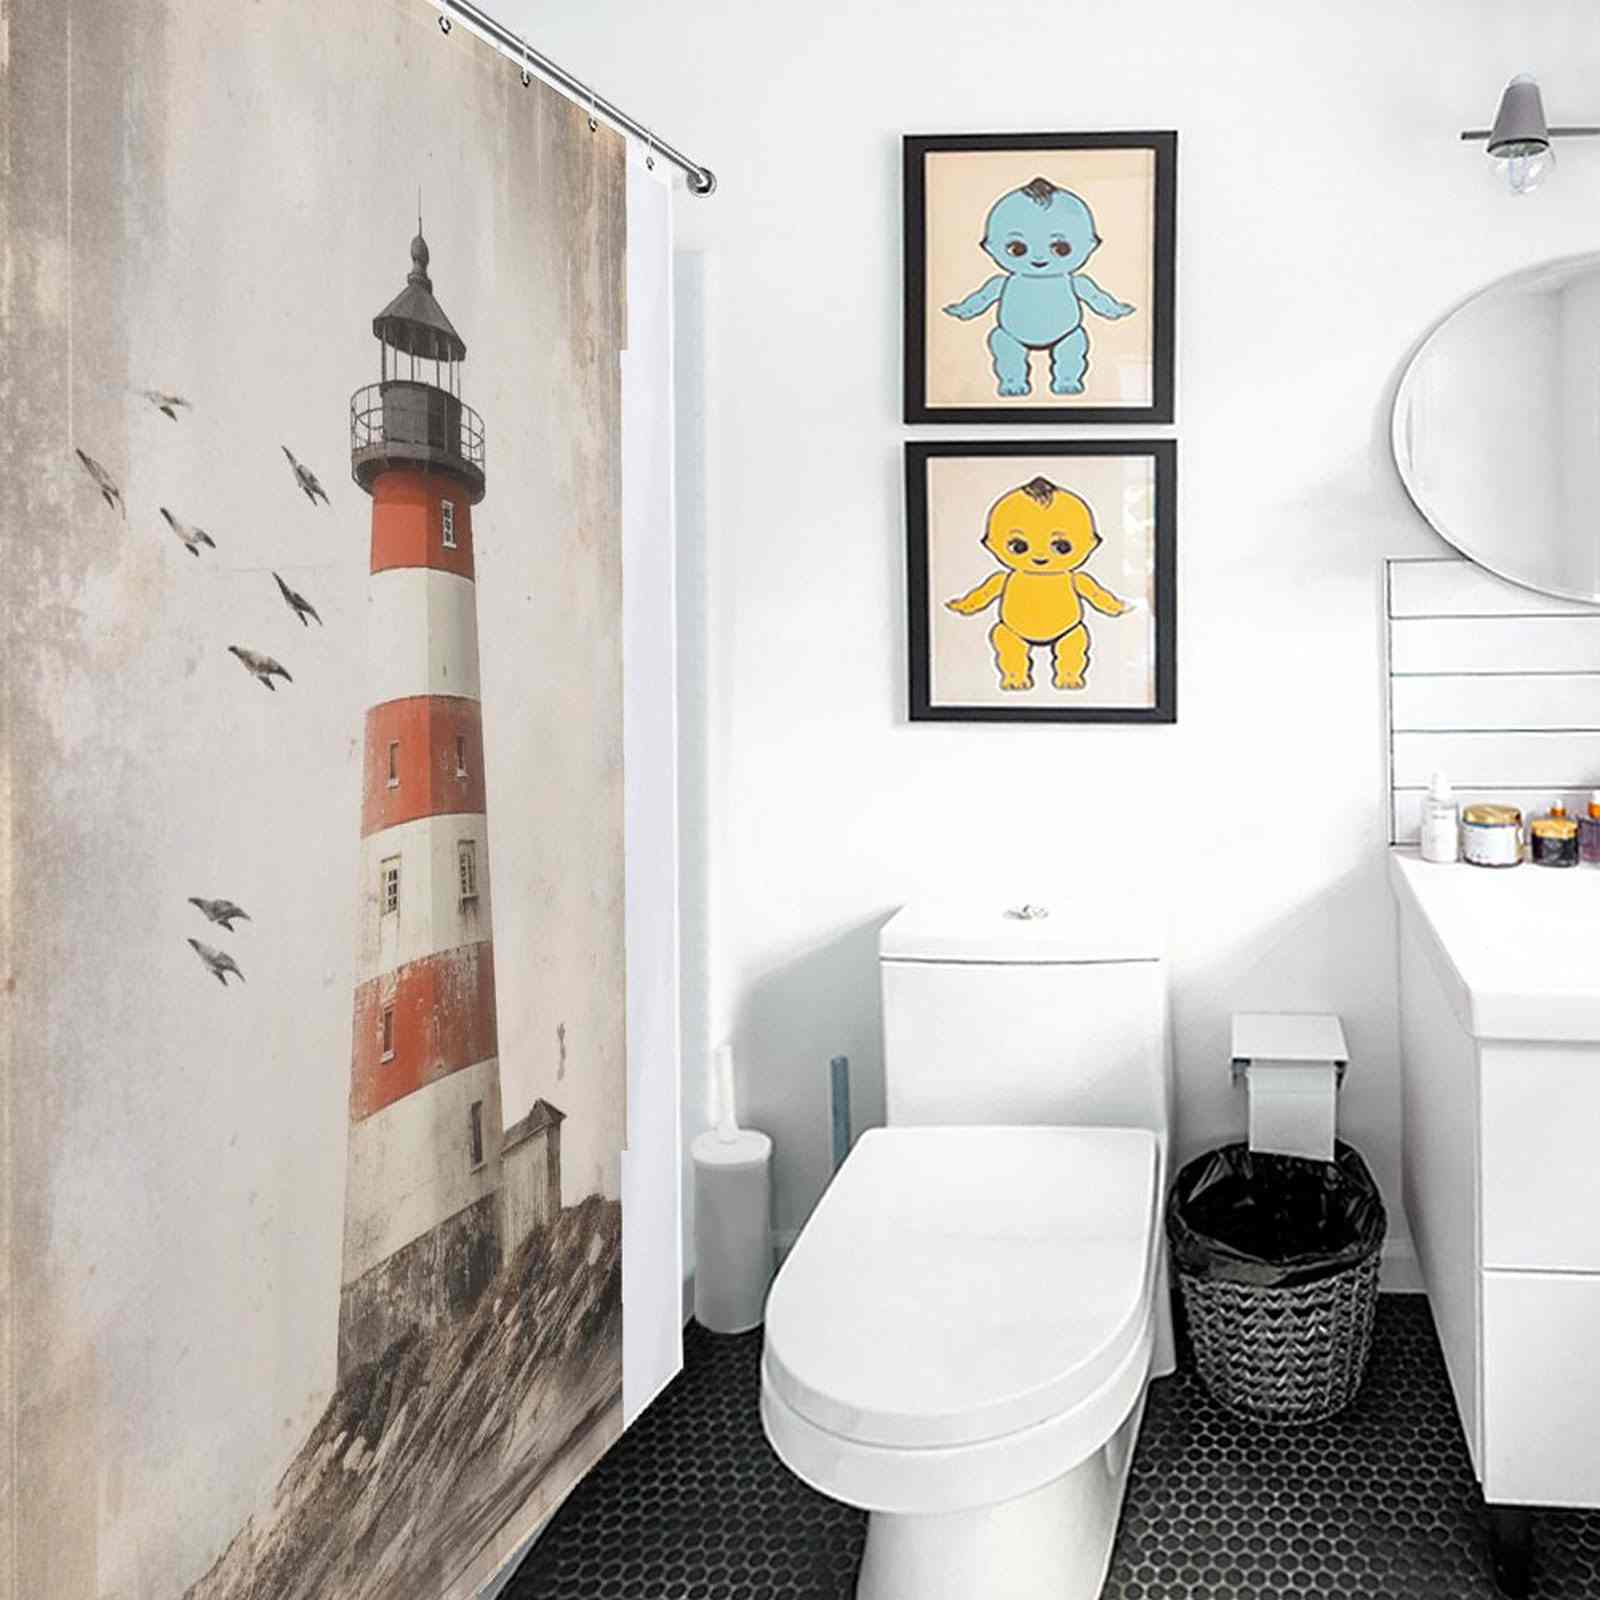 Rustic lighthouse shower curtain hangs in white bathroom